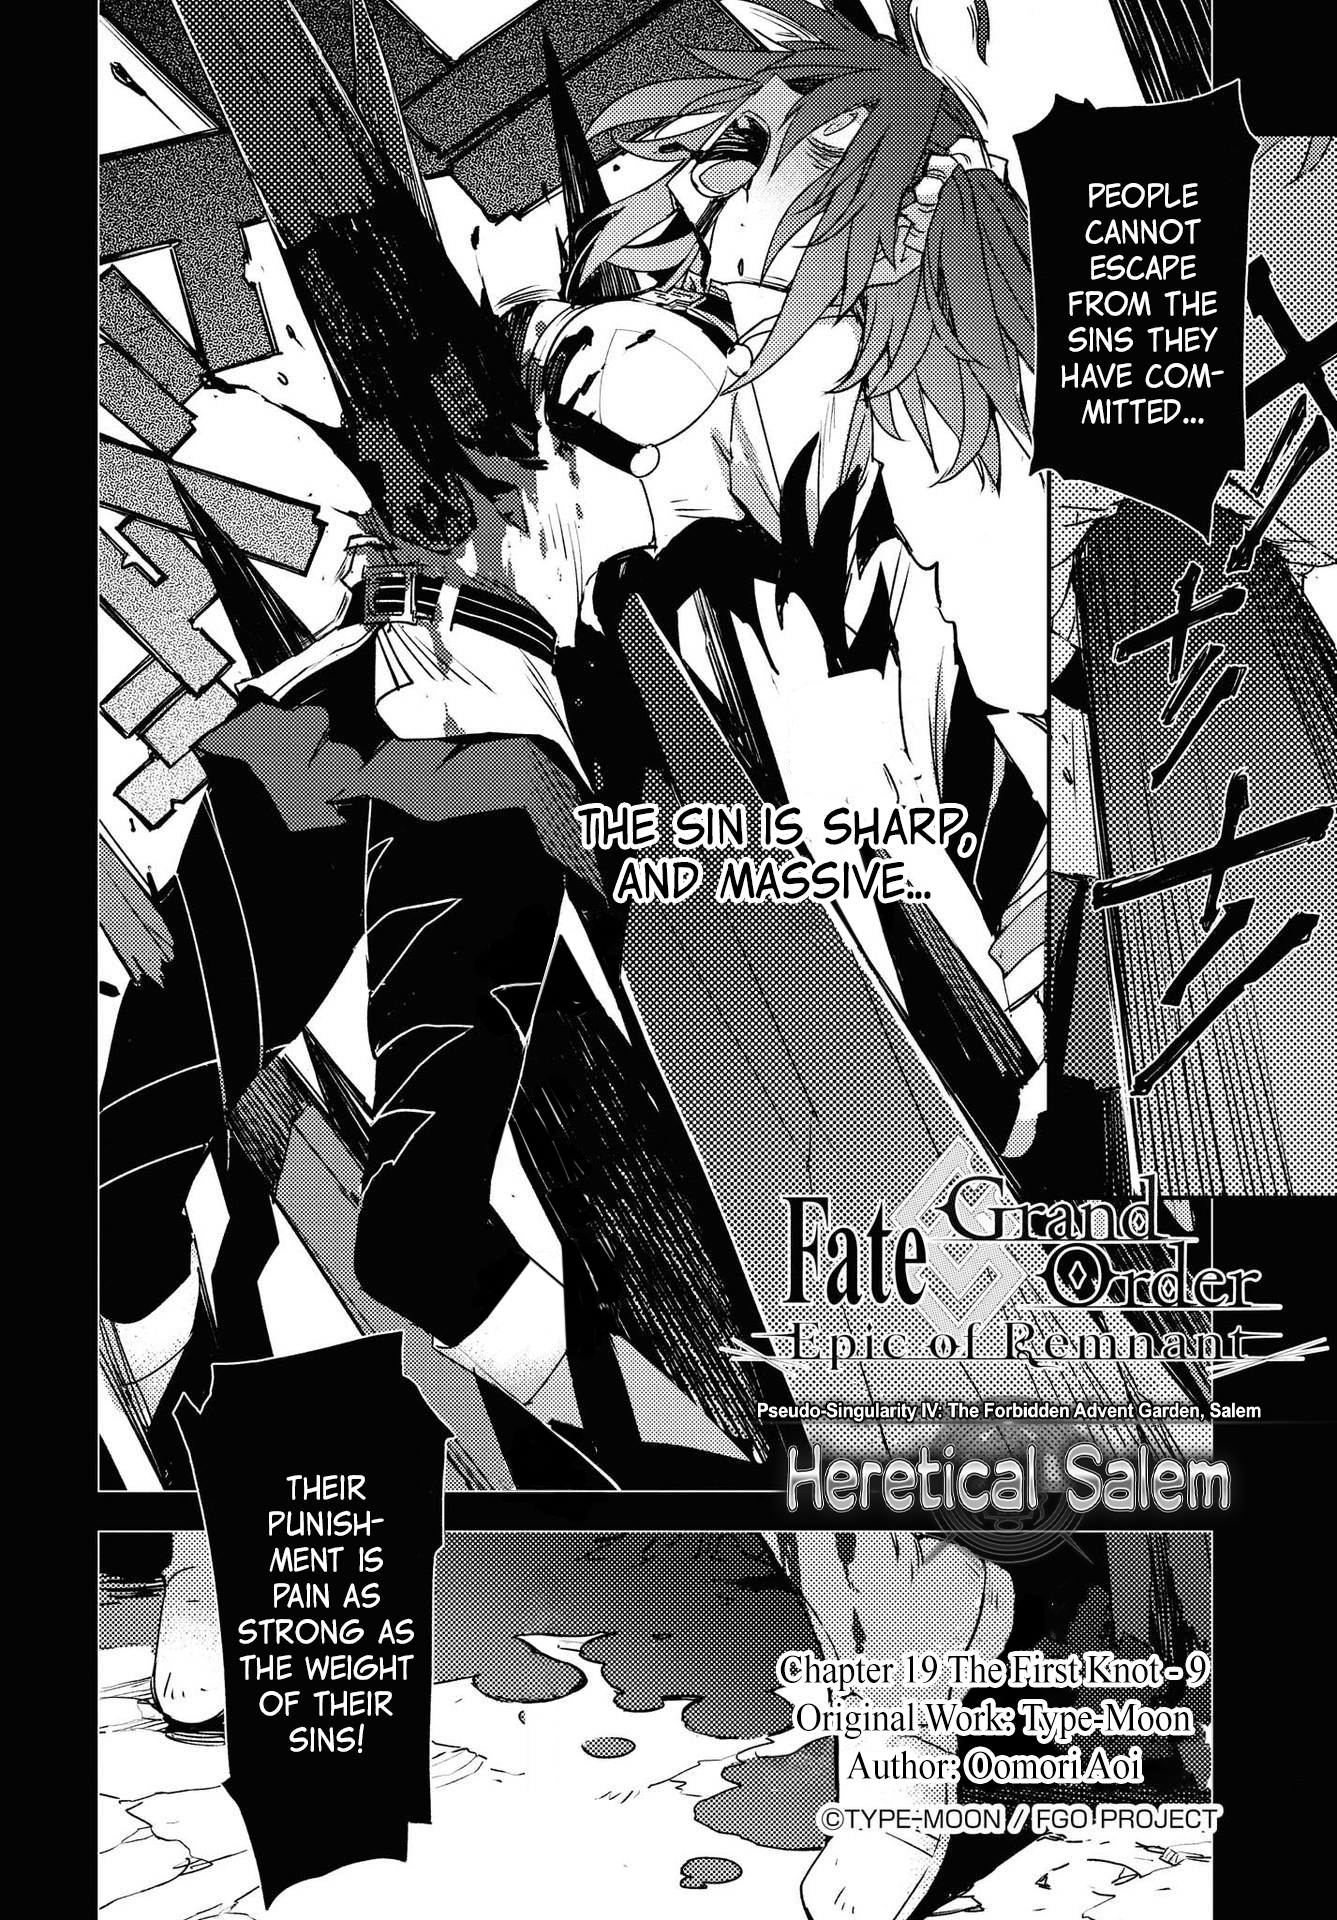 Fate/grand Order: Epic Of Remnant: Pseudo-Singularity Iv: The Forbidden Advent Garden, Salem - Heretical Salem Chapter 19: The First Knot - 9 - Picture 2